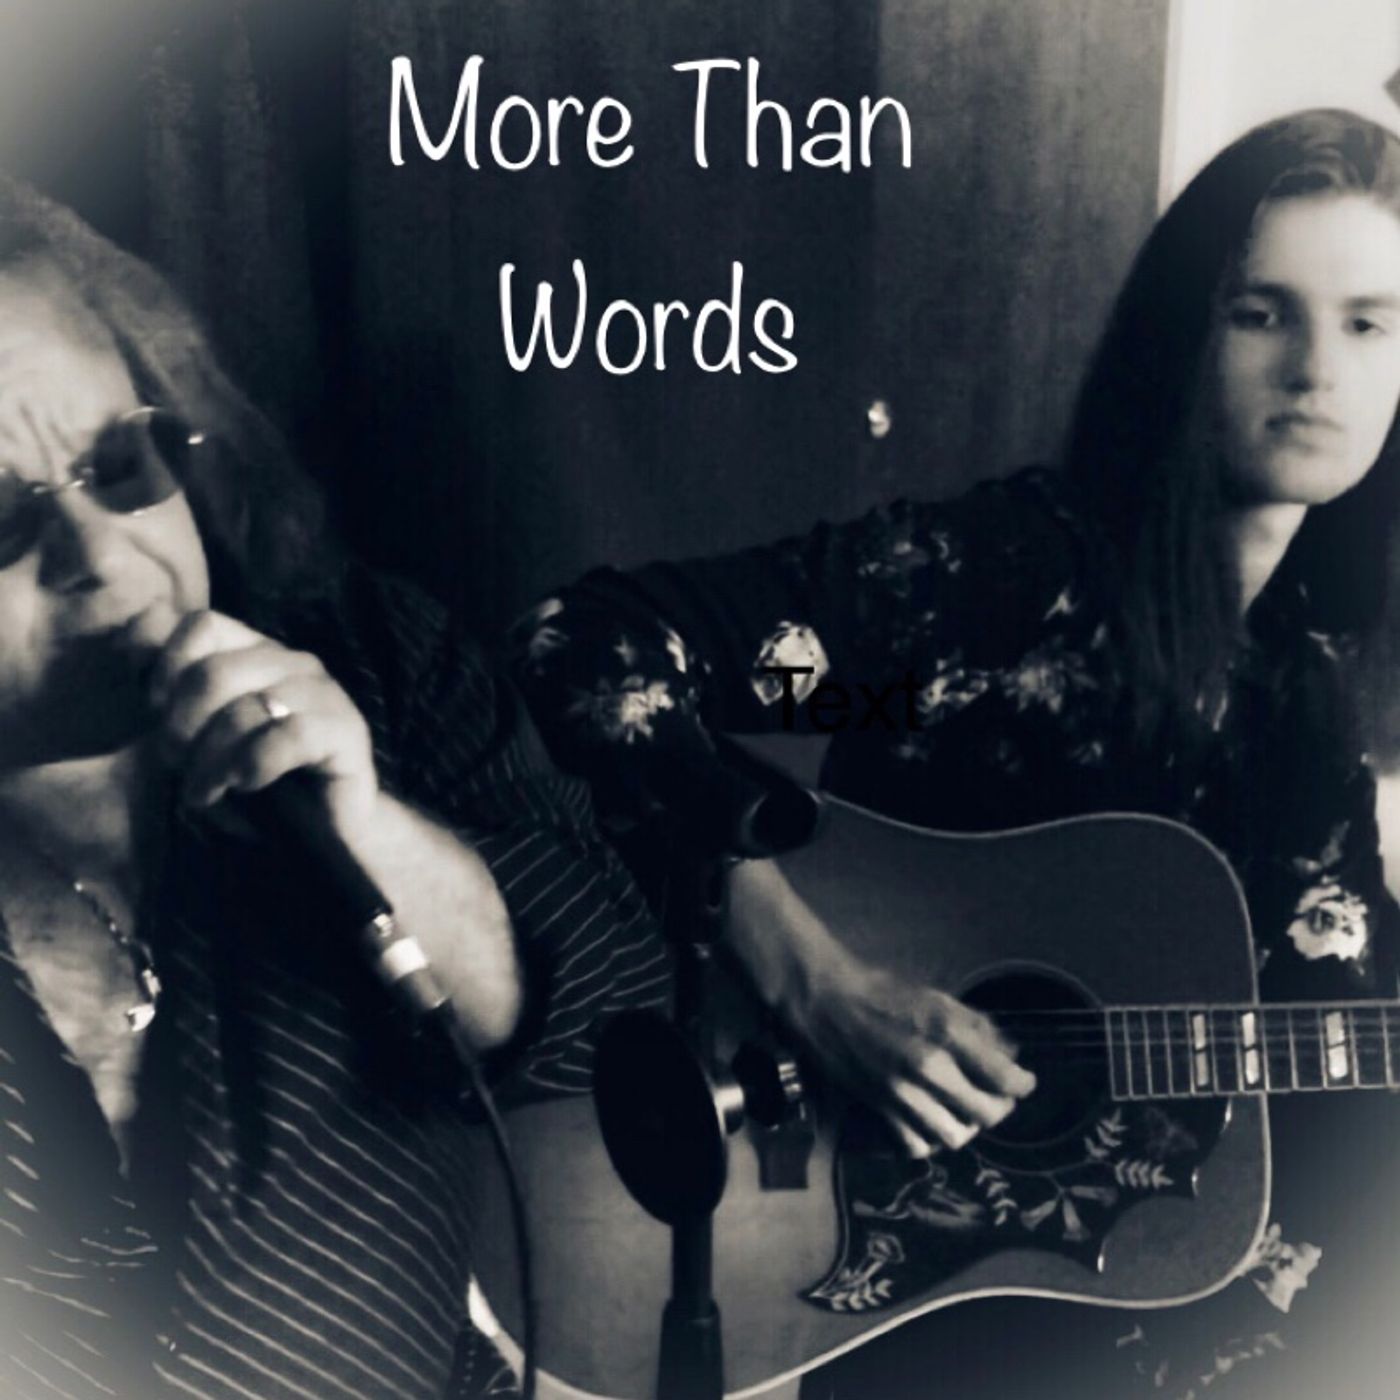 More than Words by Little Ozzy and Johnny Lawrence